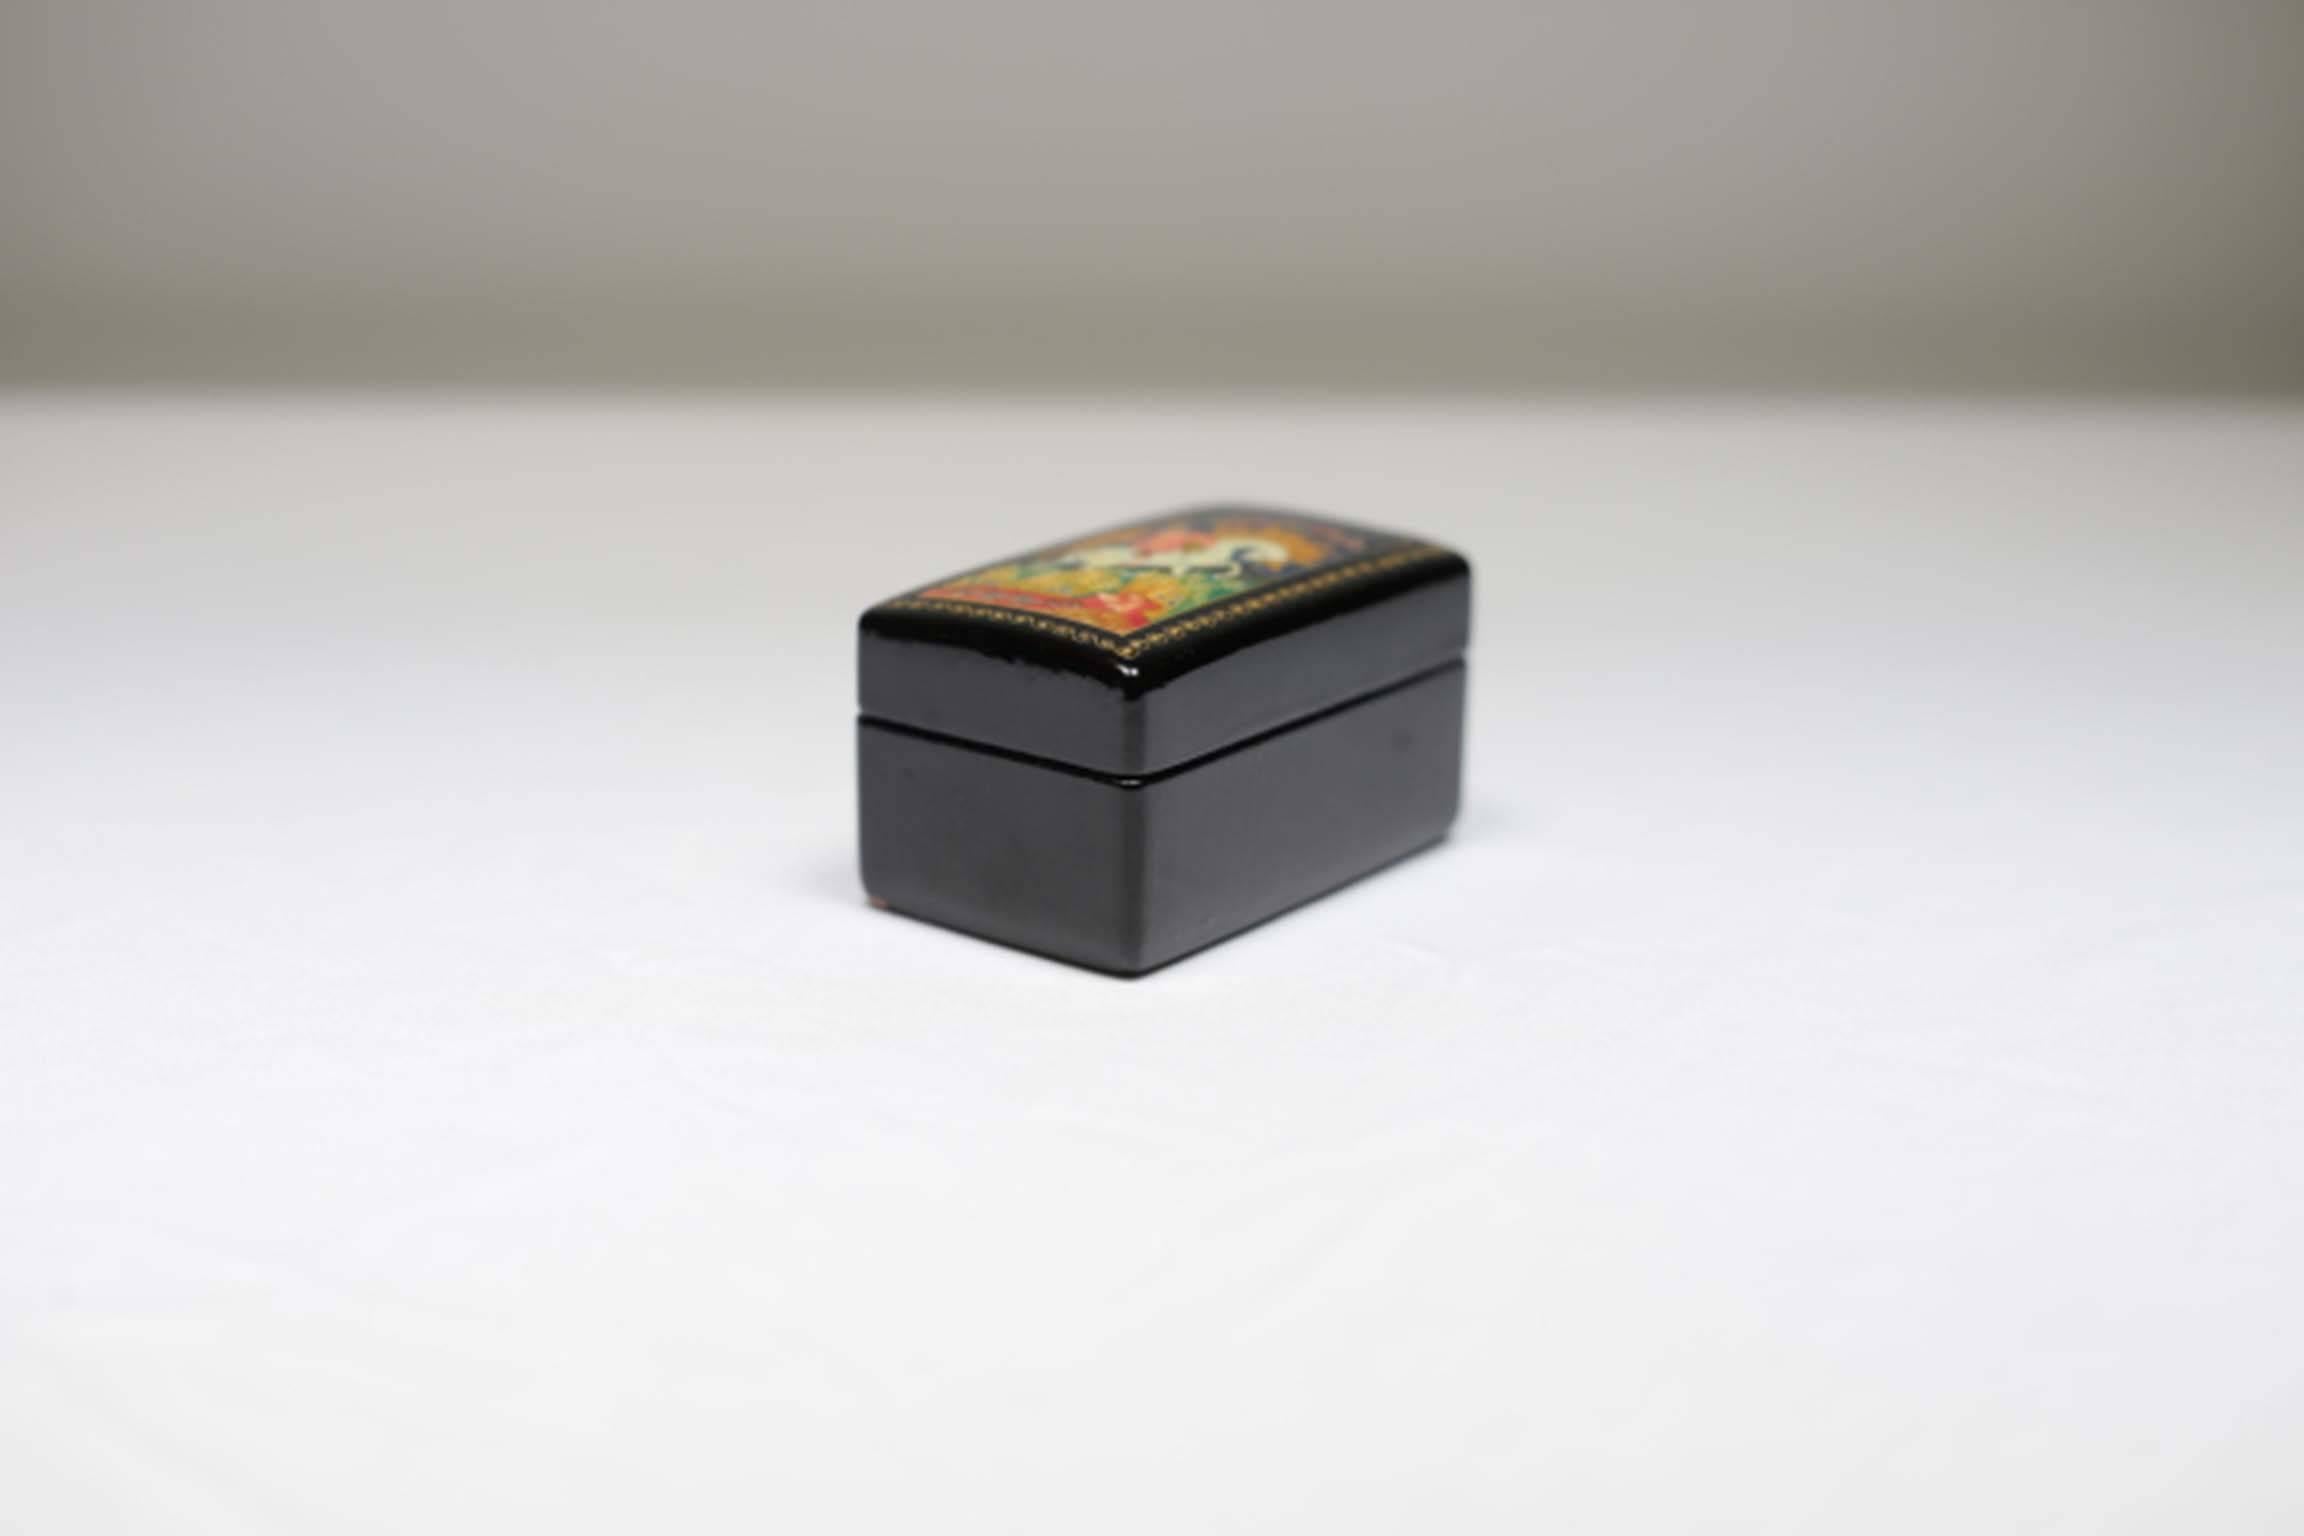 Russian Hand-Painted Lacquered Box from the U.S.S.R. Signed by Artist, circa 1970-1980